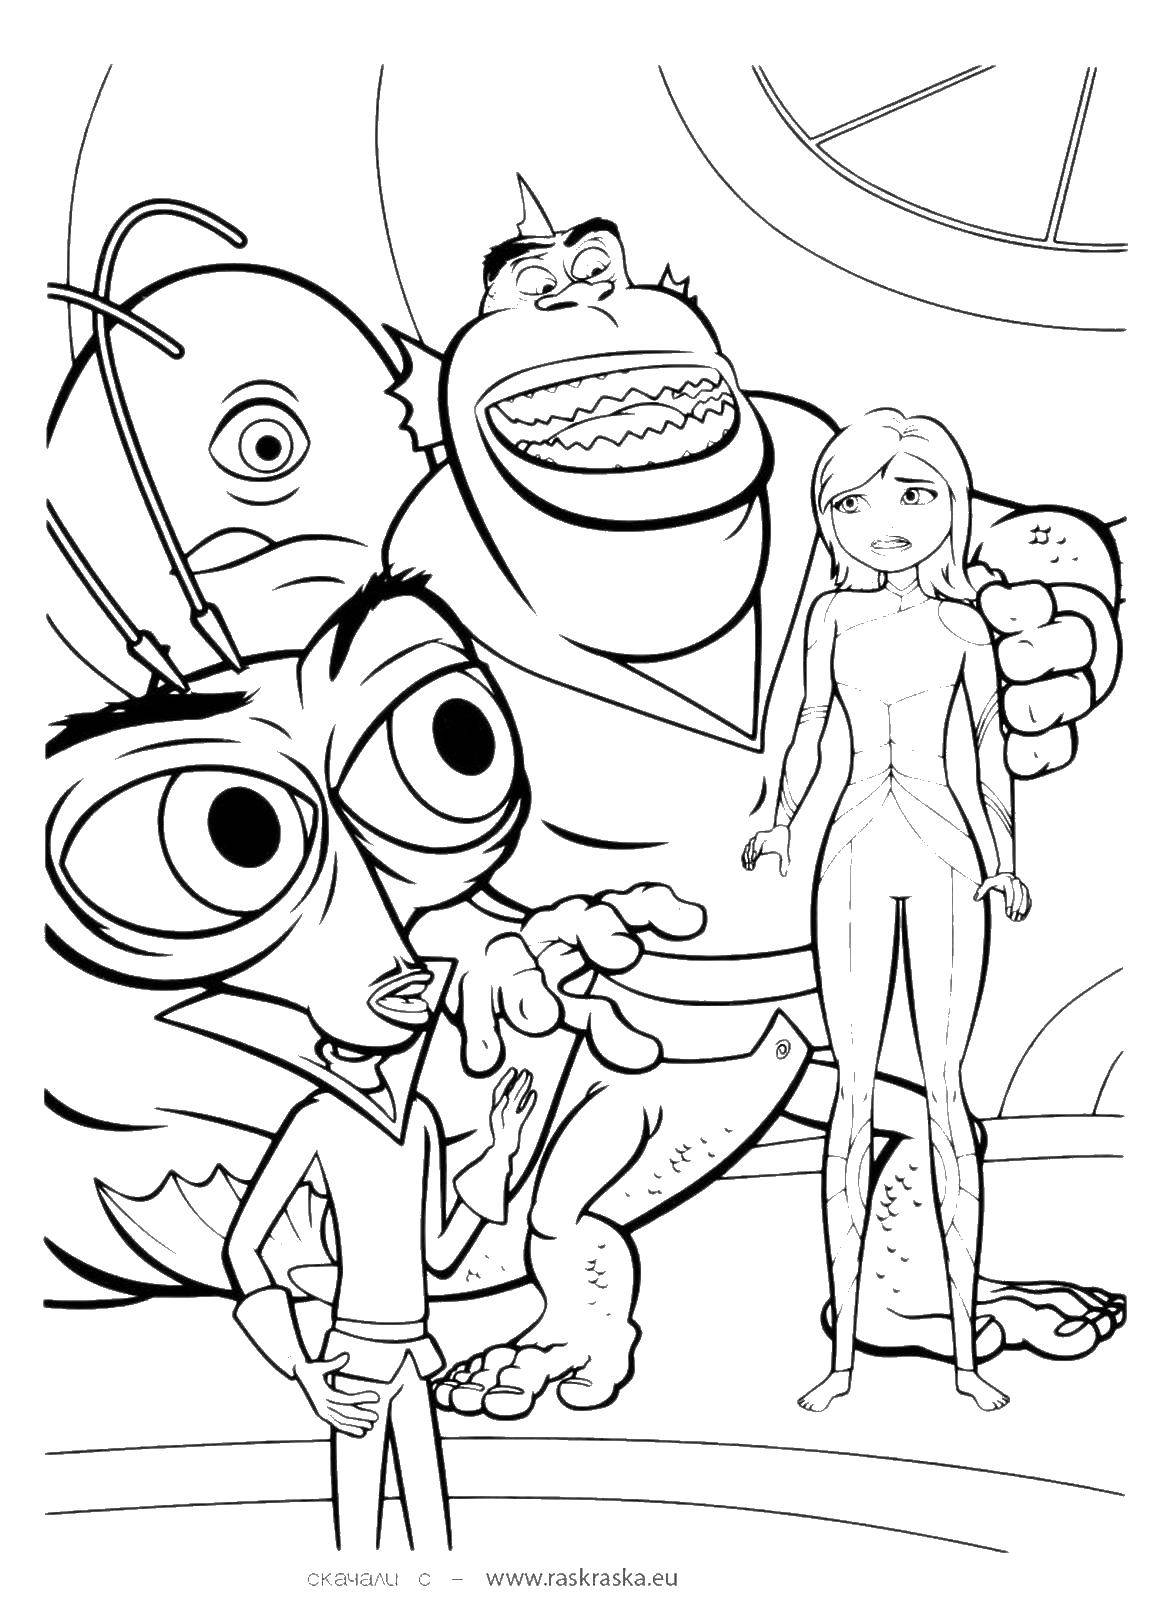 Coloring Monsters. Category Coloring pages monsters. Tags:  monsters, girl.